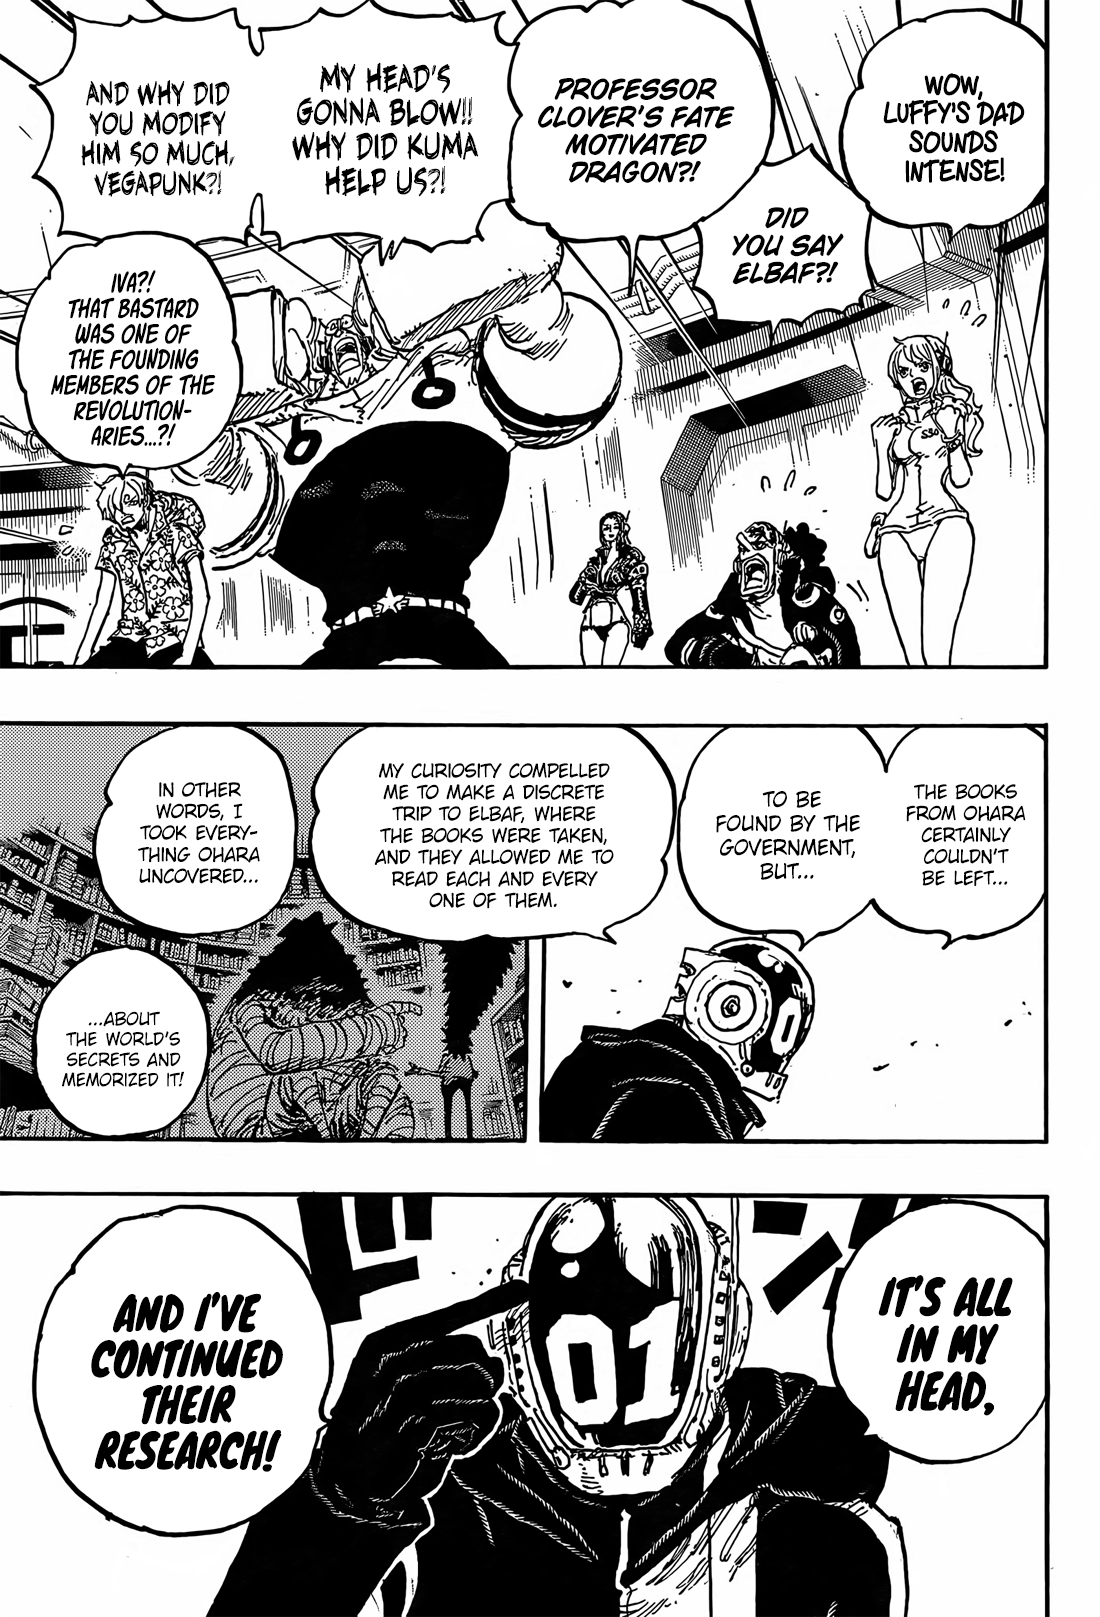 Vegapunk memorised it all - One Piece Chapter 1066